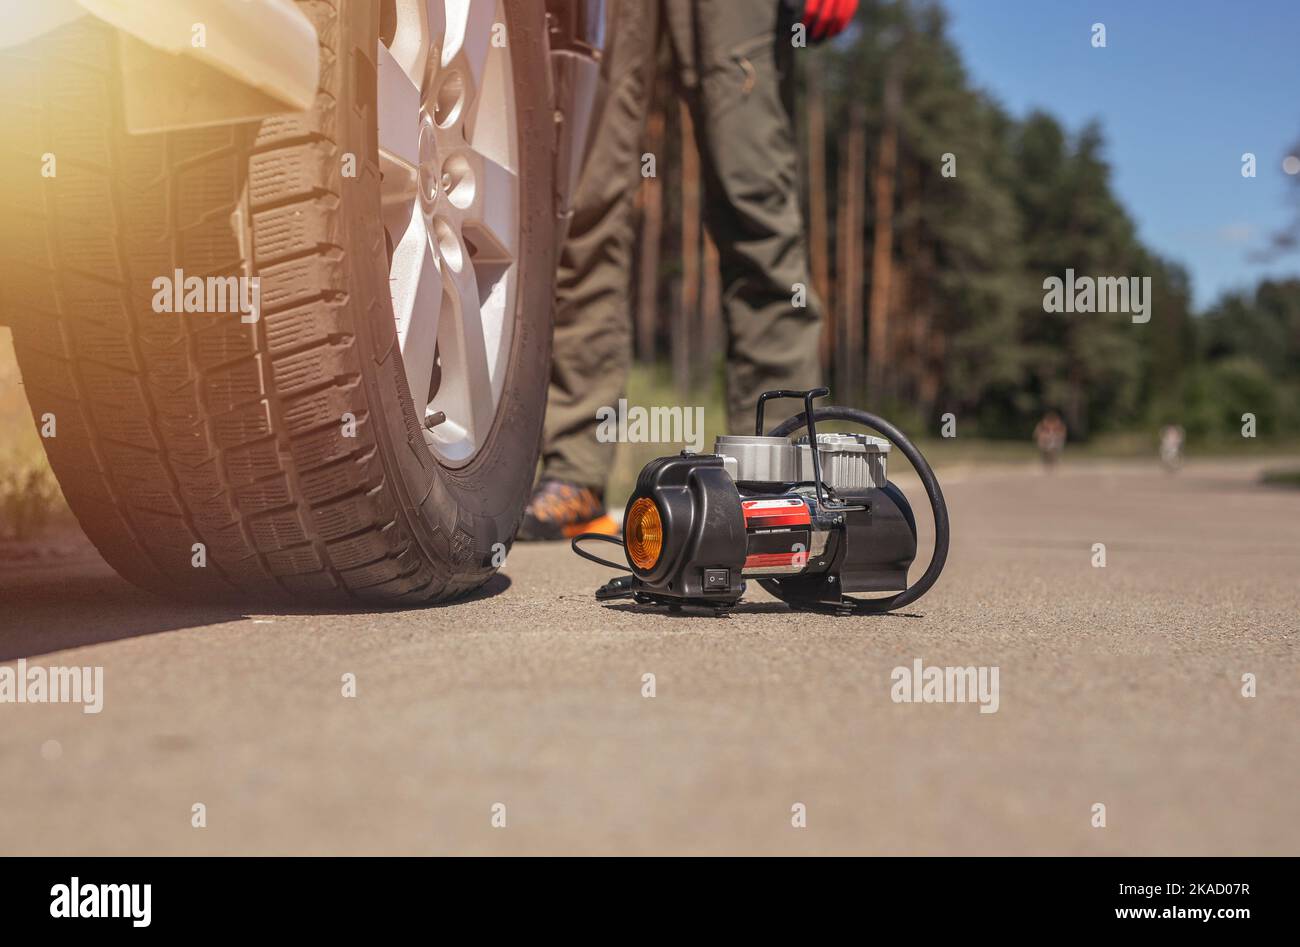 Portable tire pump for inflating car wheel, bottom view. Tyre inflator with manometer on road closeup. Stock Photo